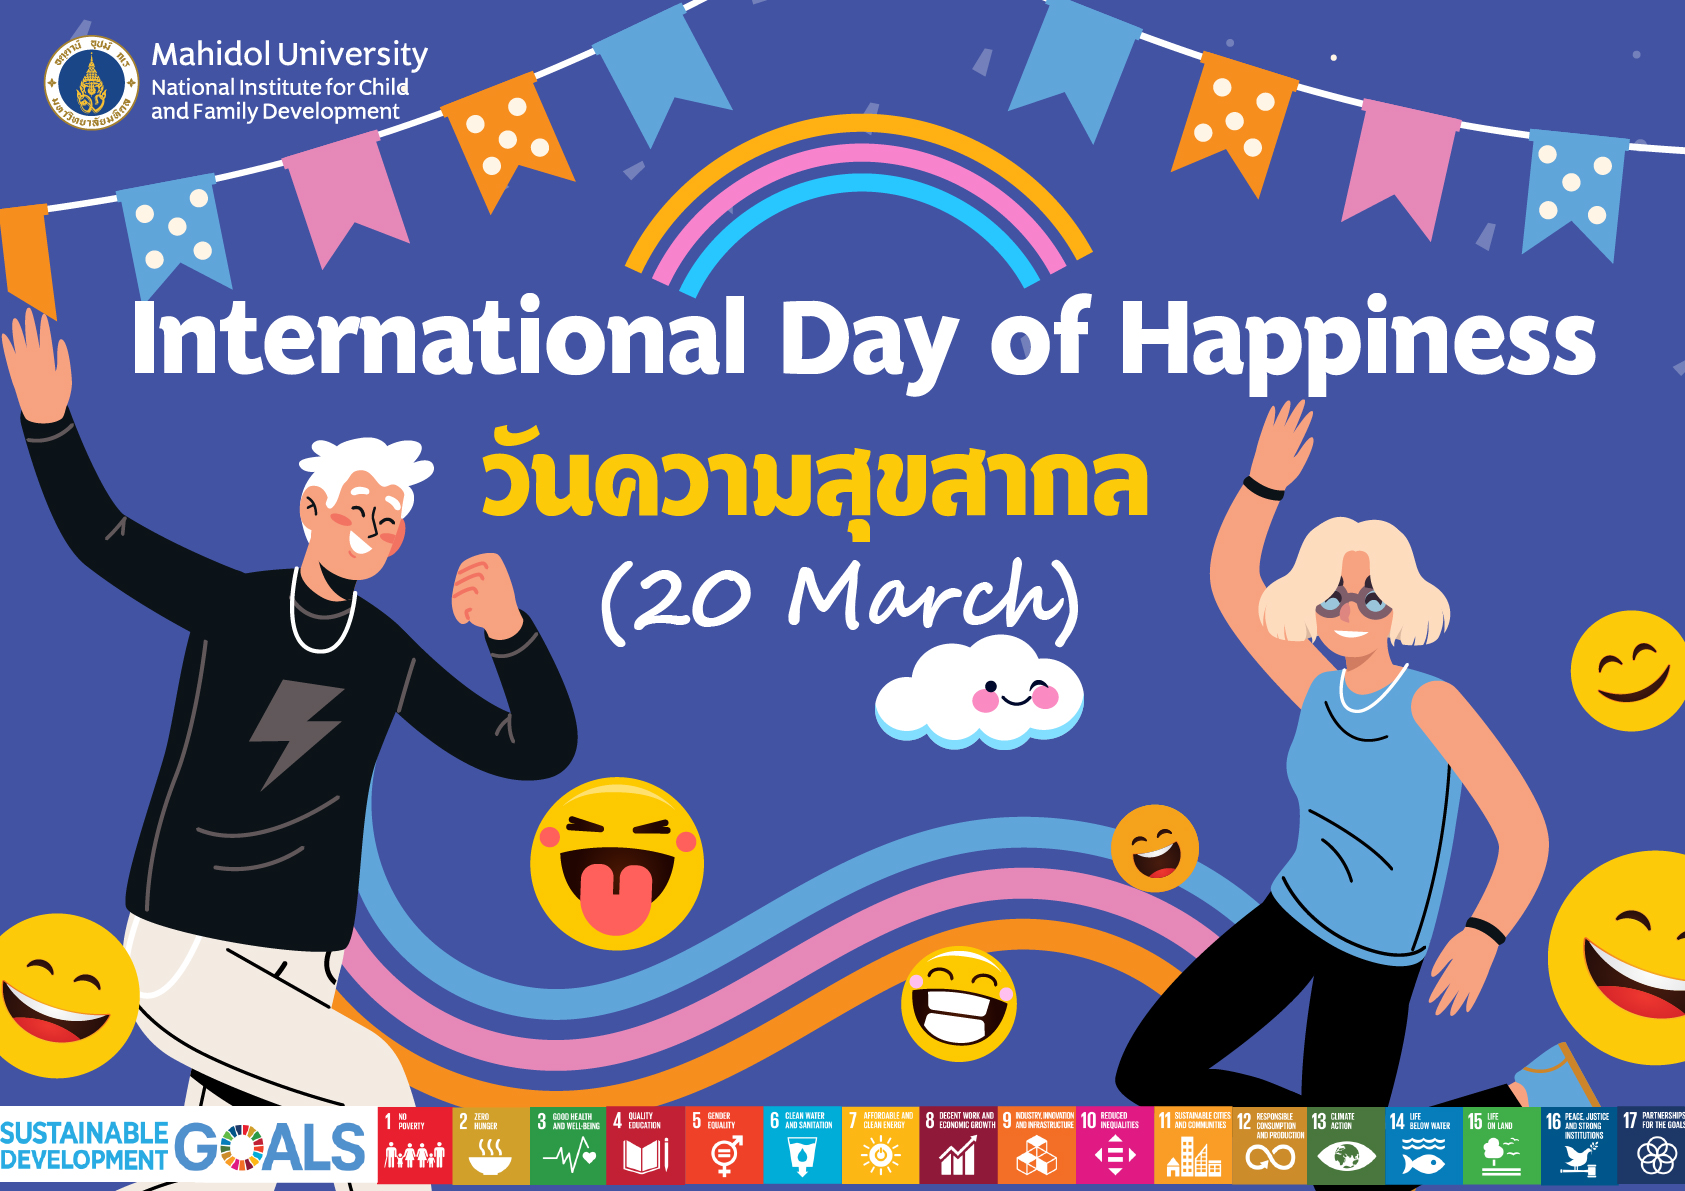 International Day of Happiness is celebrated on 20 March. It is the day